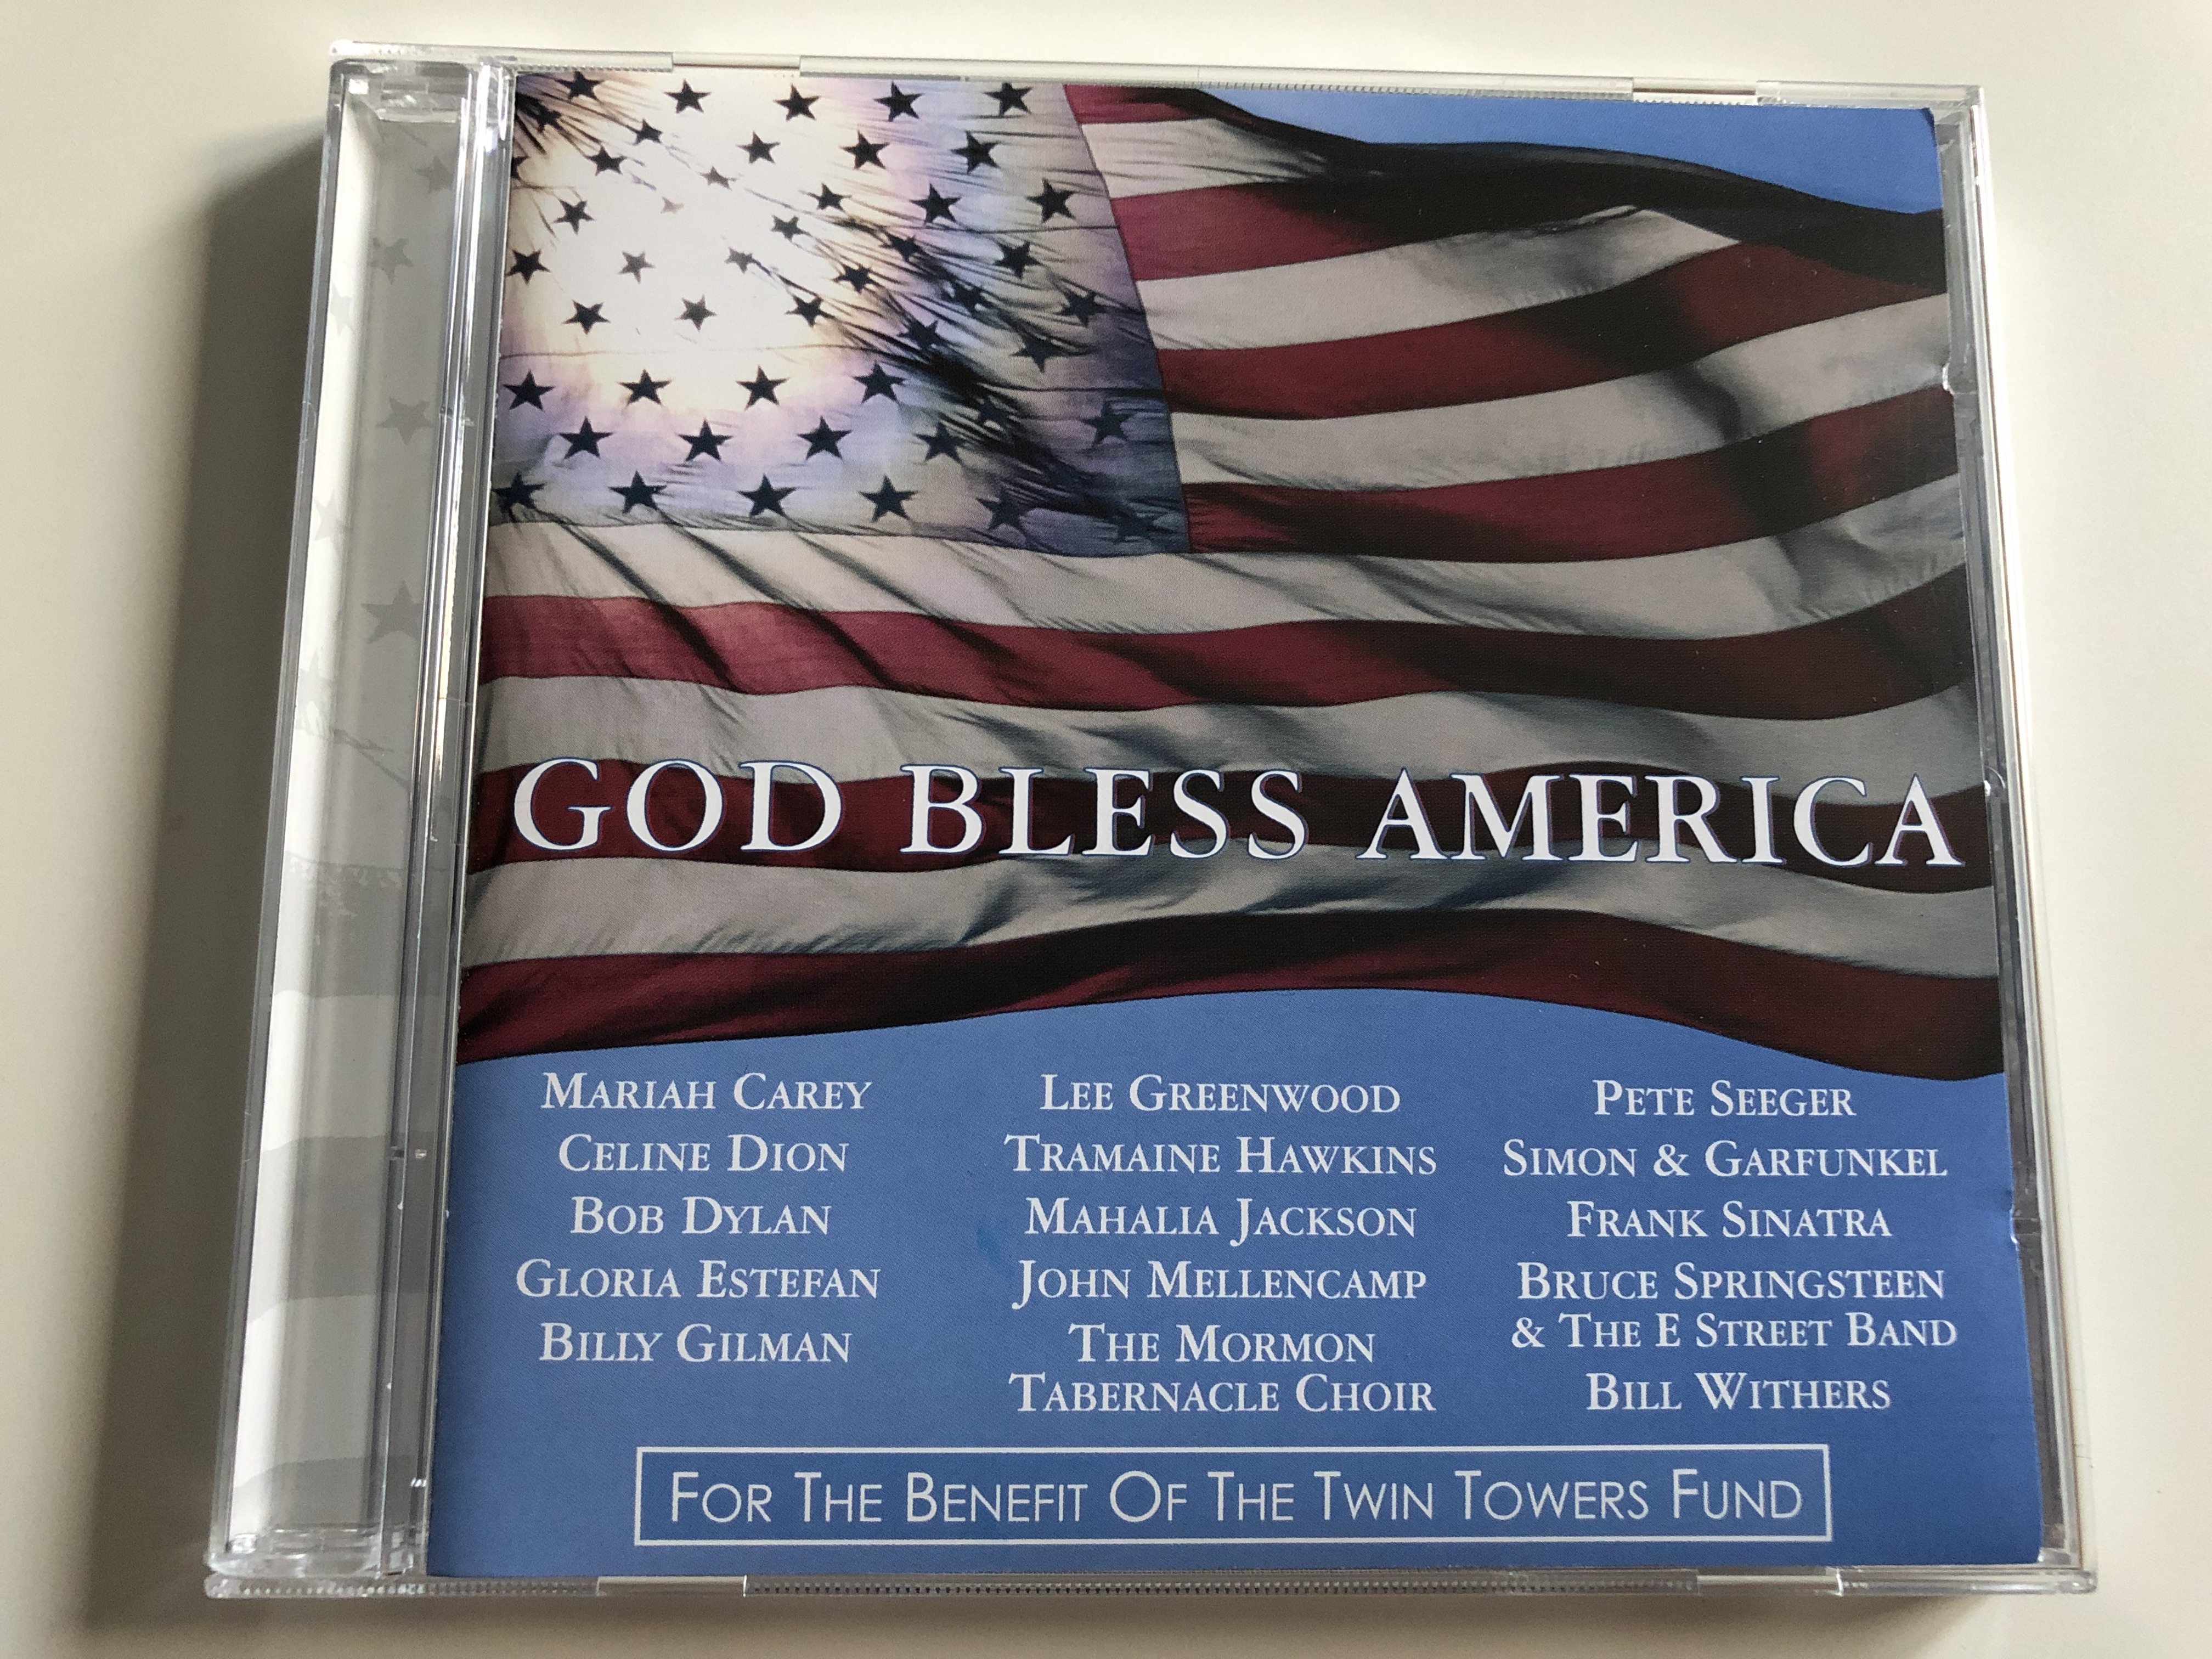 god-bless-america-mariah-carey-celine-dion-bob-dylan-simon-garfunkel-frank-sinatra-bill-withers-for-the-benefit-of-the-twin-towers-fund-audio-cd-2001-col-5051862-1-.jpg